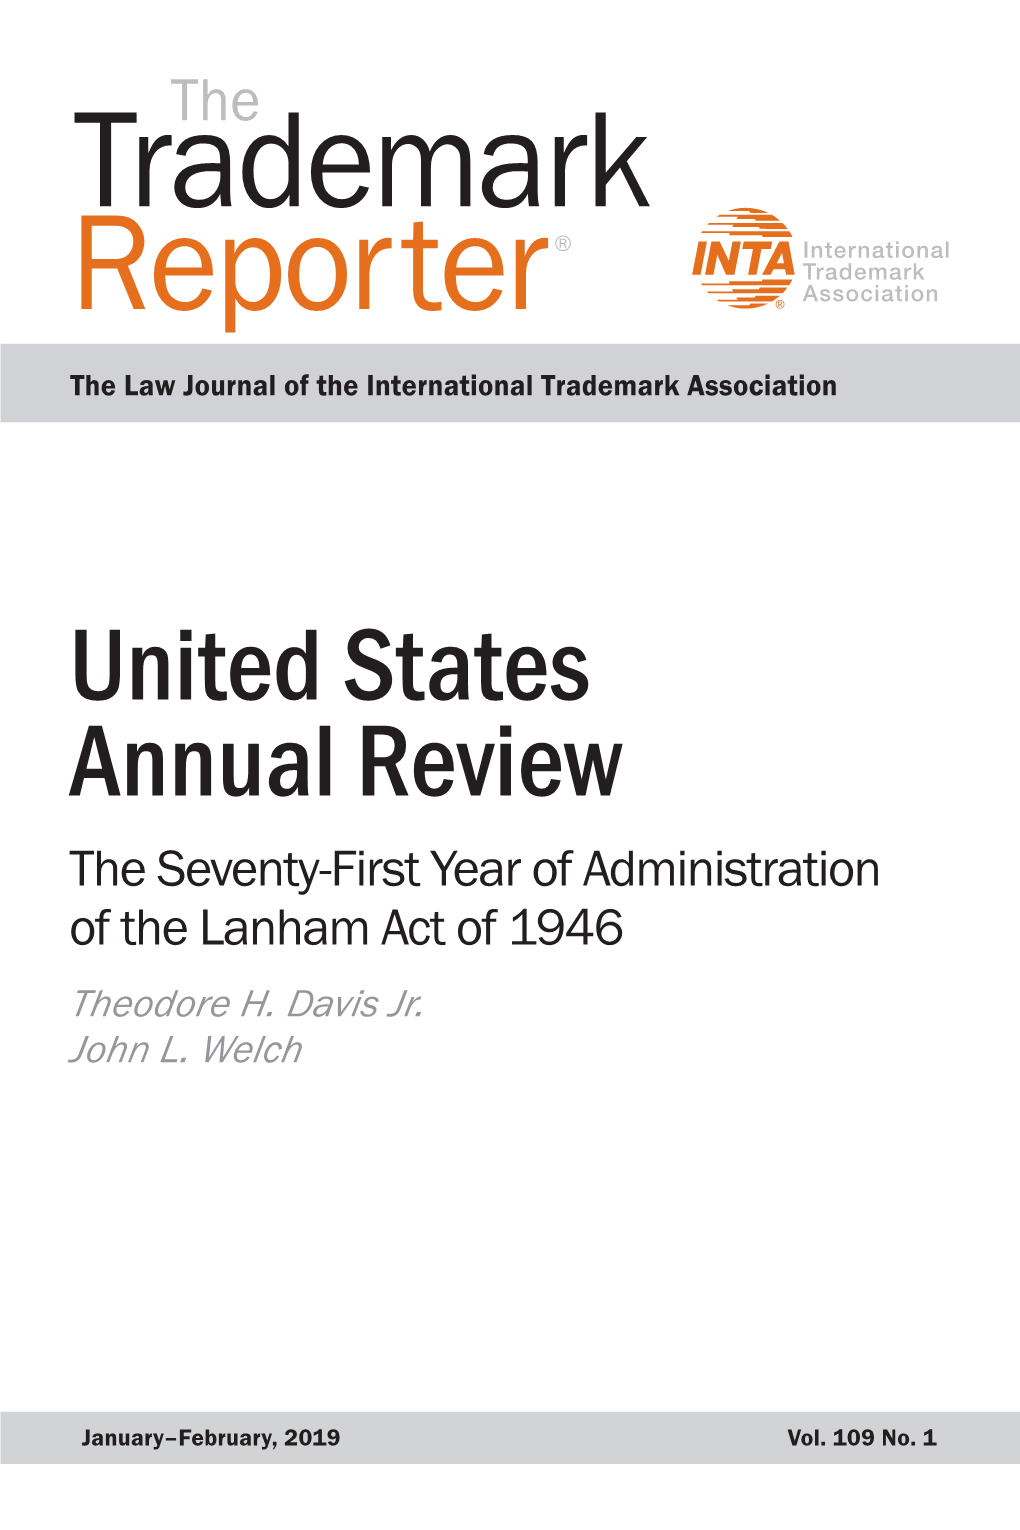 United States Annual Review the Seventy-First Year of Administration of the Lanham Act of 1946 Theodore H